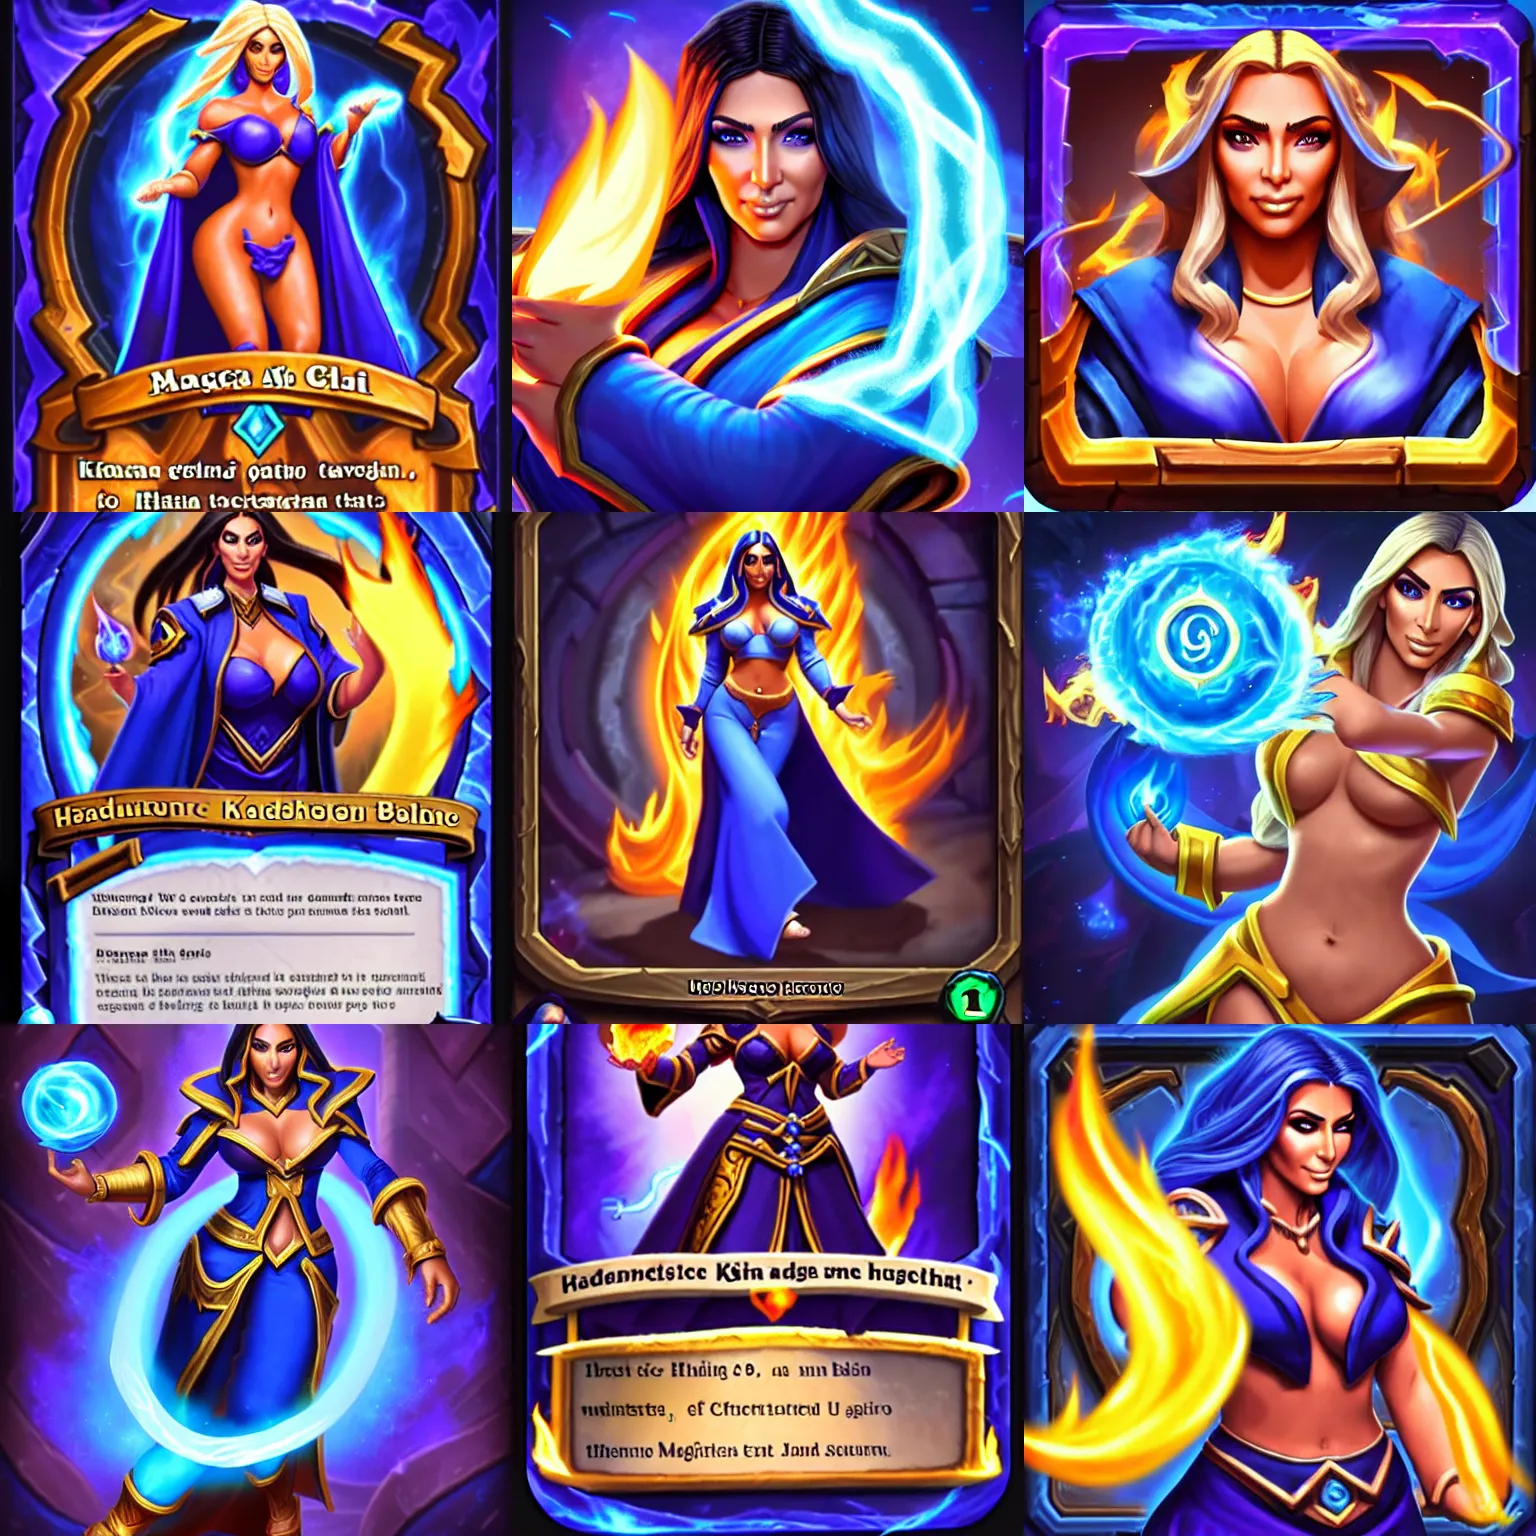 Prompt: Who : a mage with a blue robe casting a fire ball ; Face and hair : Jaina ; Body type : Kim Kardashian ; Frame : no ; IMPORTANT : Hearthstone official splash art, award winning, trending in category Epic